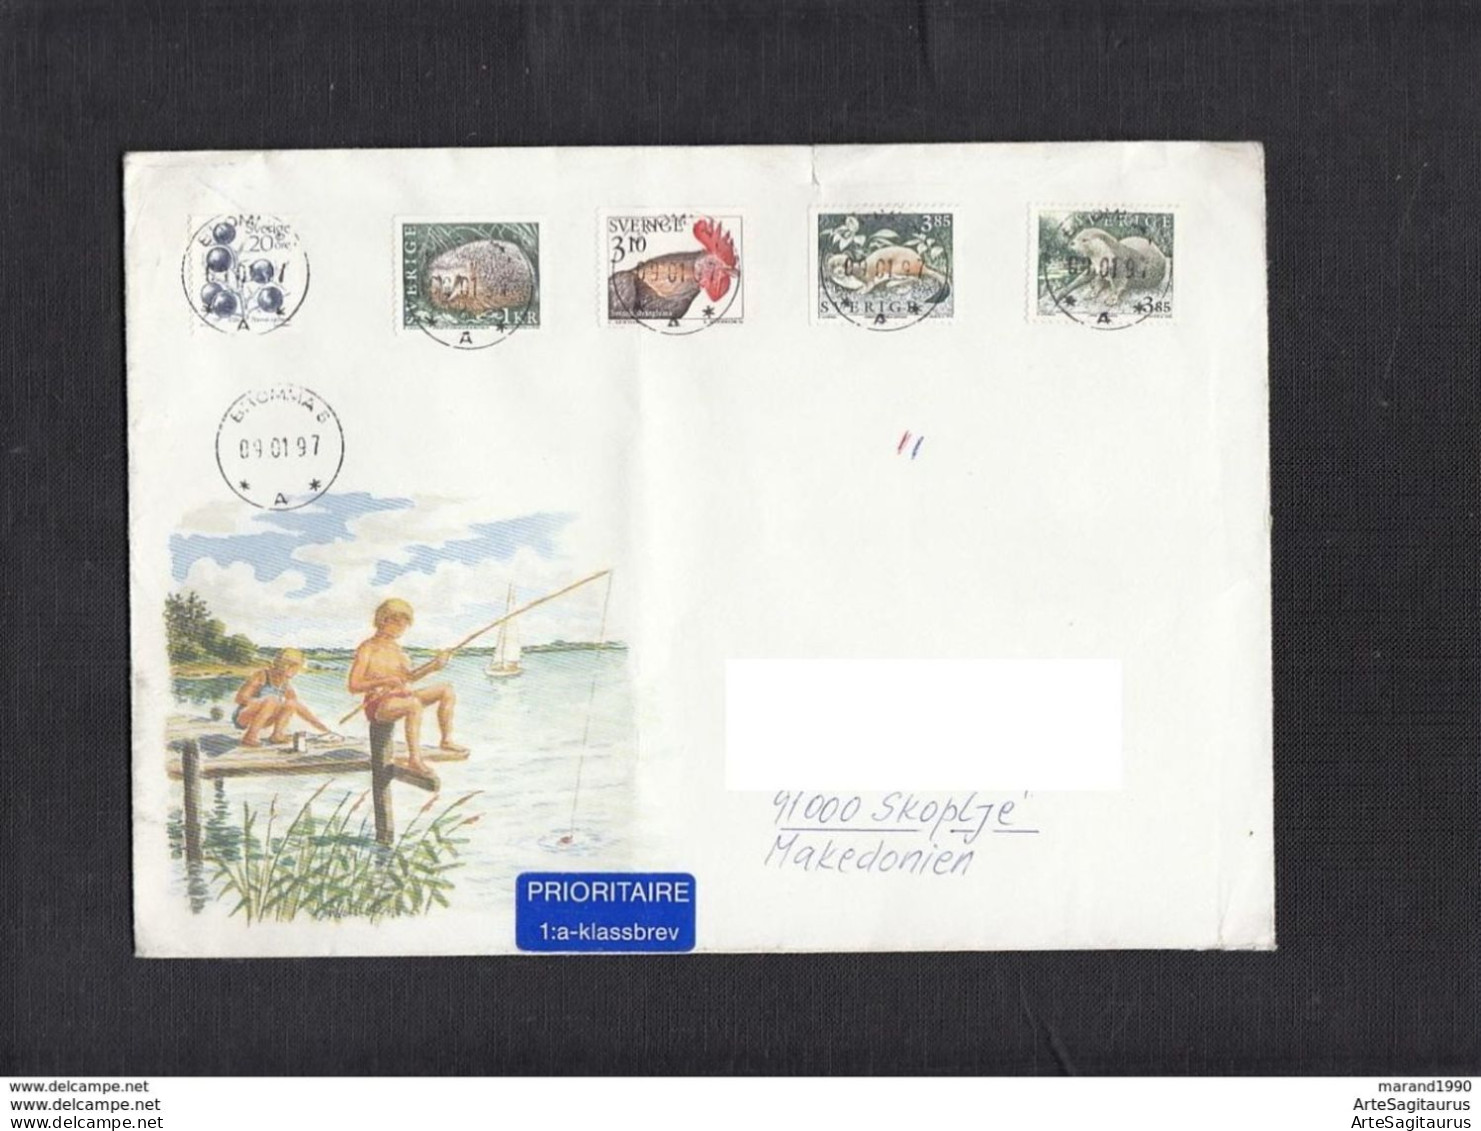 SWEDEN, COVER, BIRDS, ANIMALS, BEARS, REPUBLIC OF MACEDONIA  (008) - Lettres & Documents